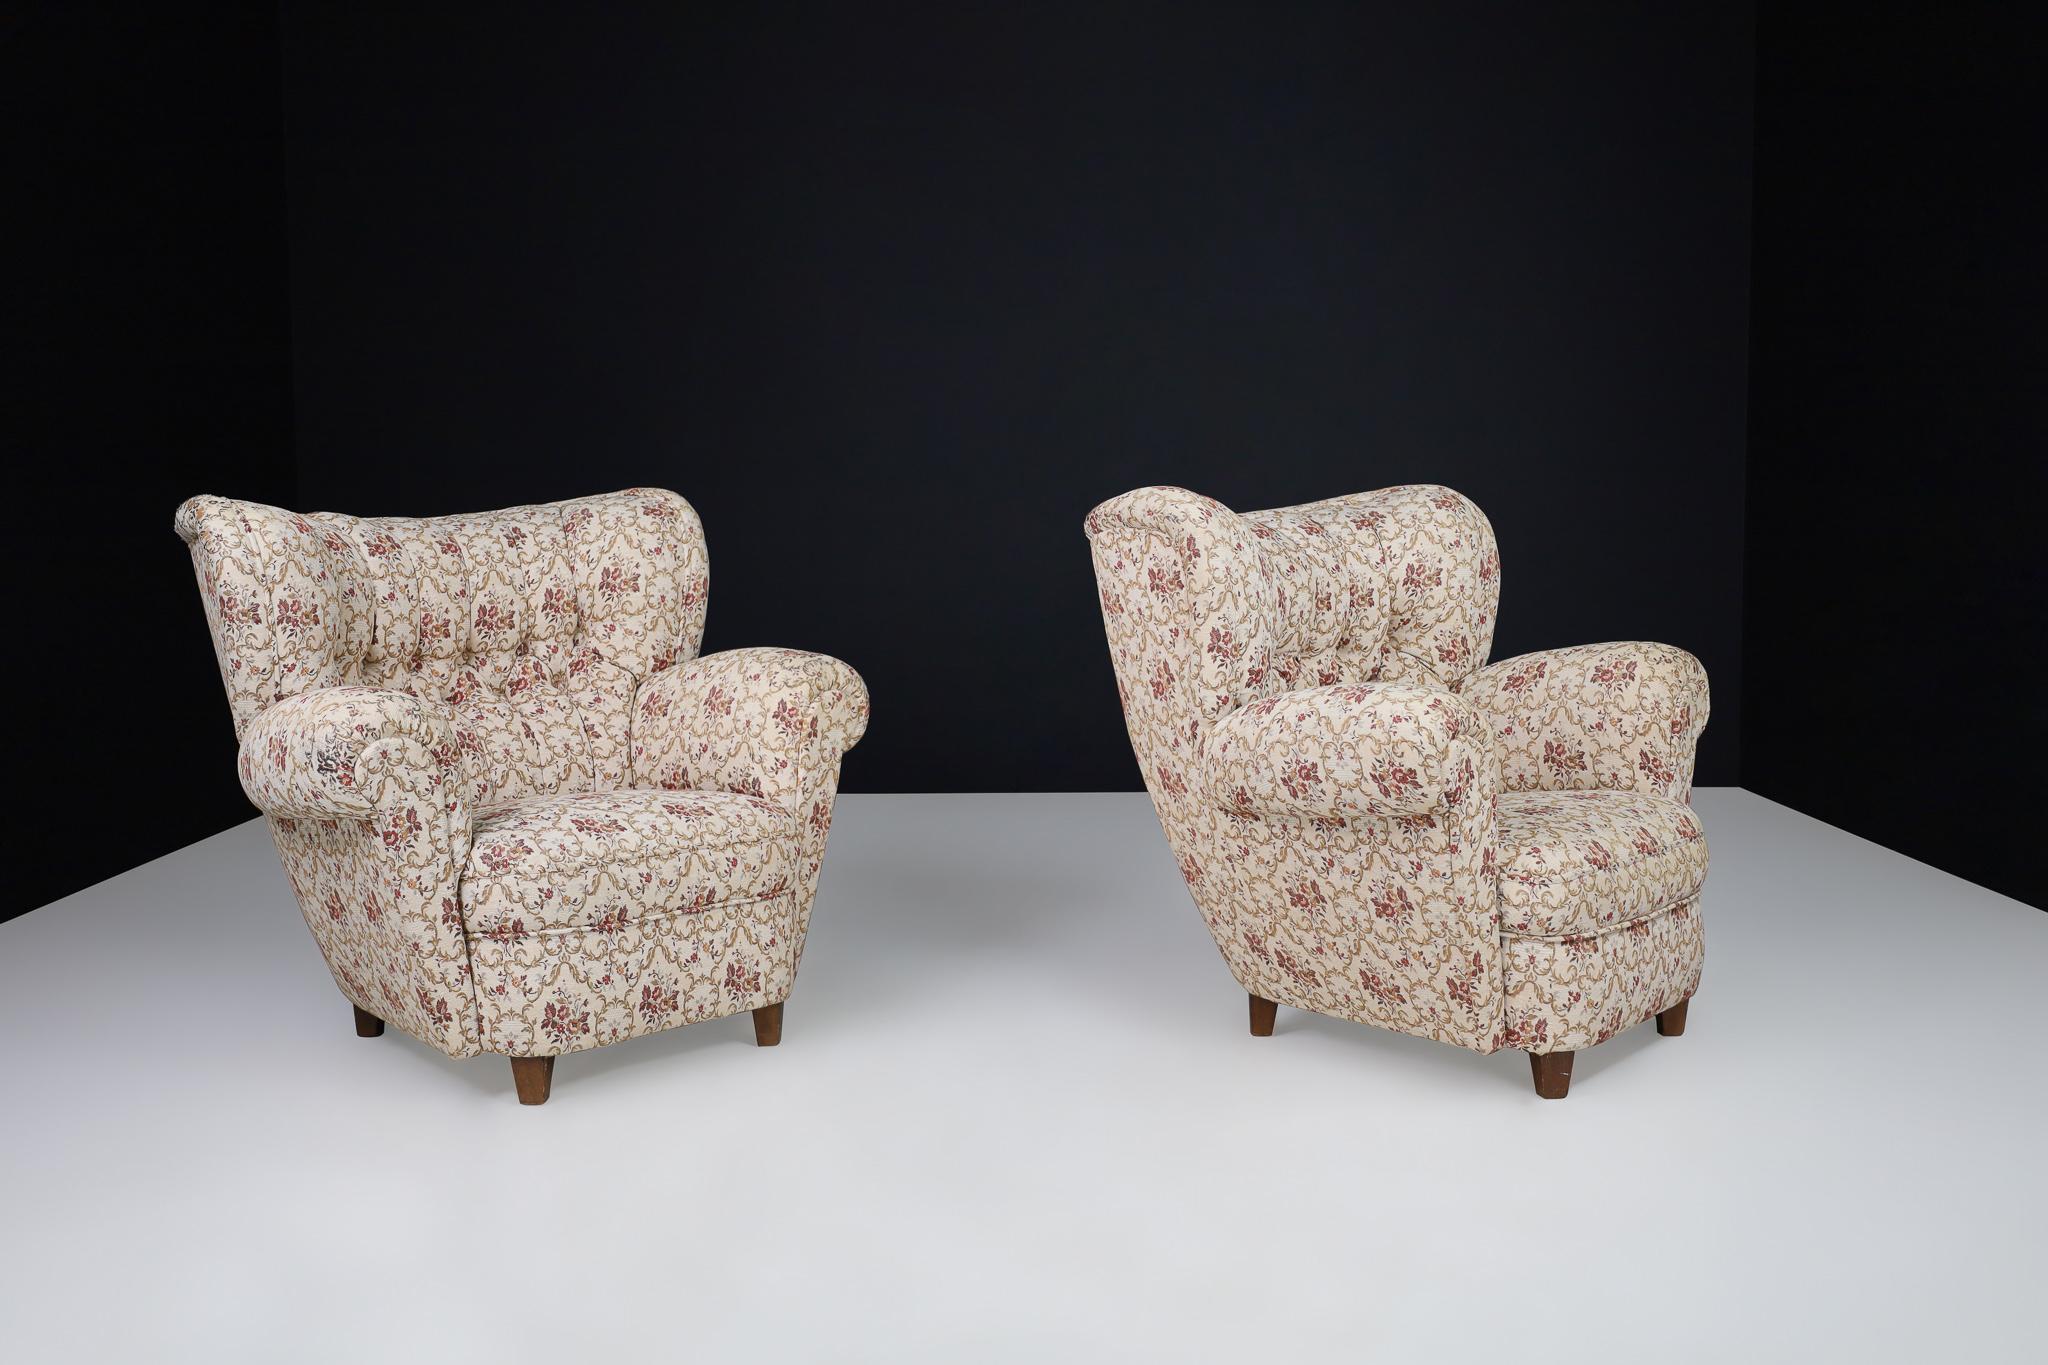 Czech Large Art-Deco Pair Armchairs in Original Floral Upholstery, Praque 1930s For Sale